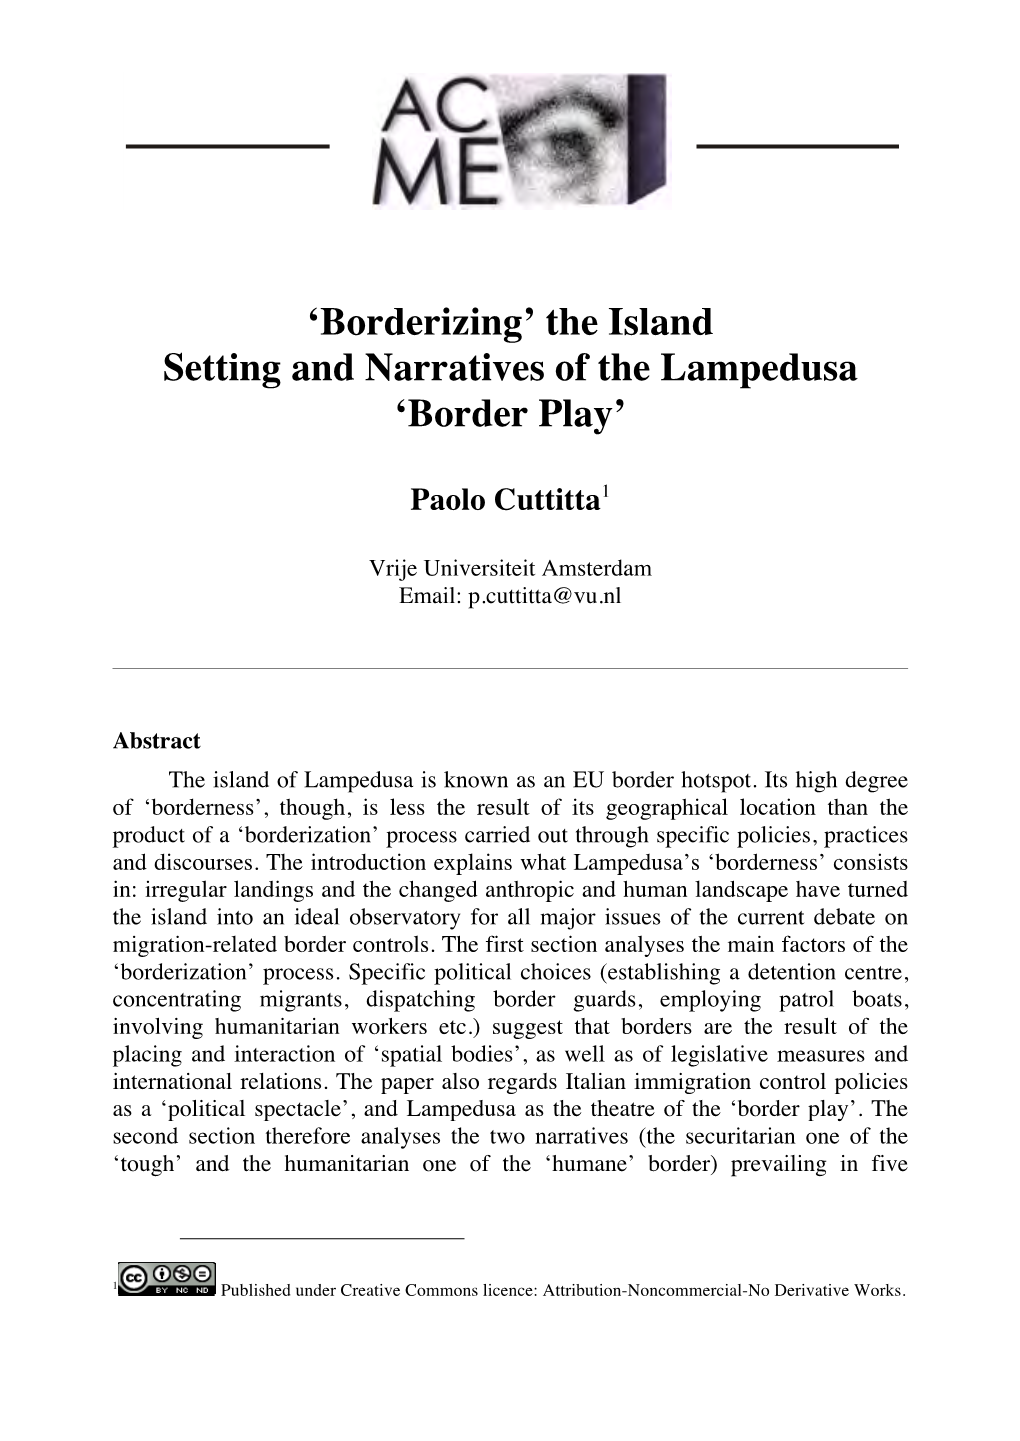 The Island Setting and Narratives of the Lampedusa 'Border Play'